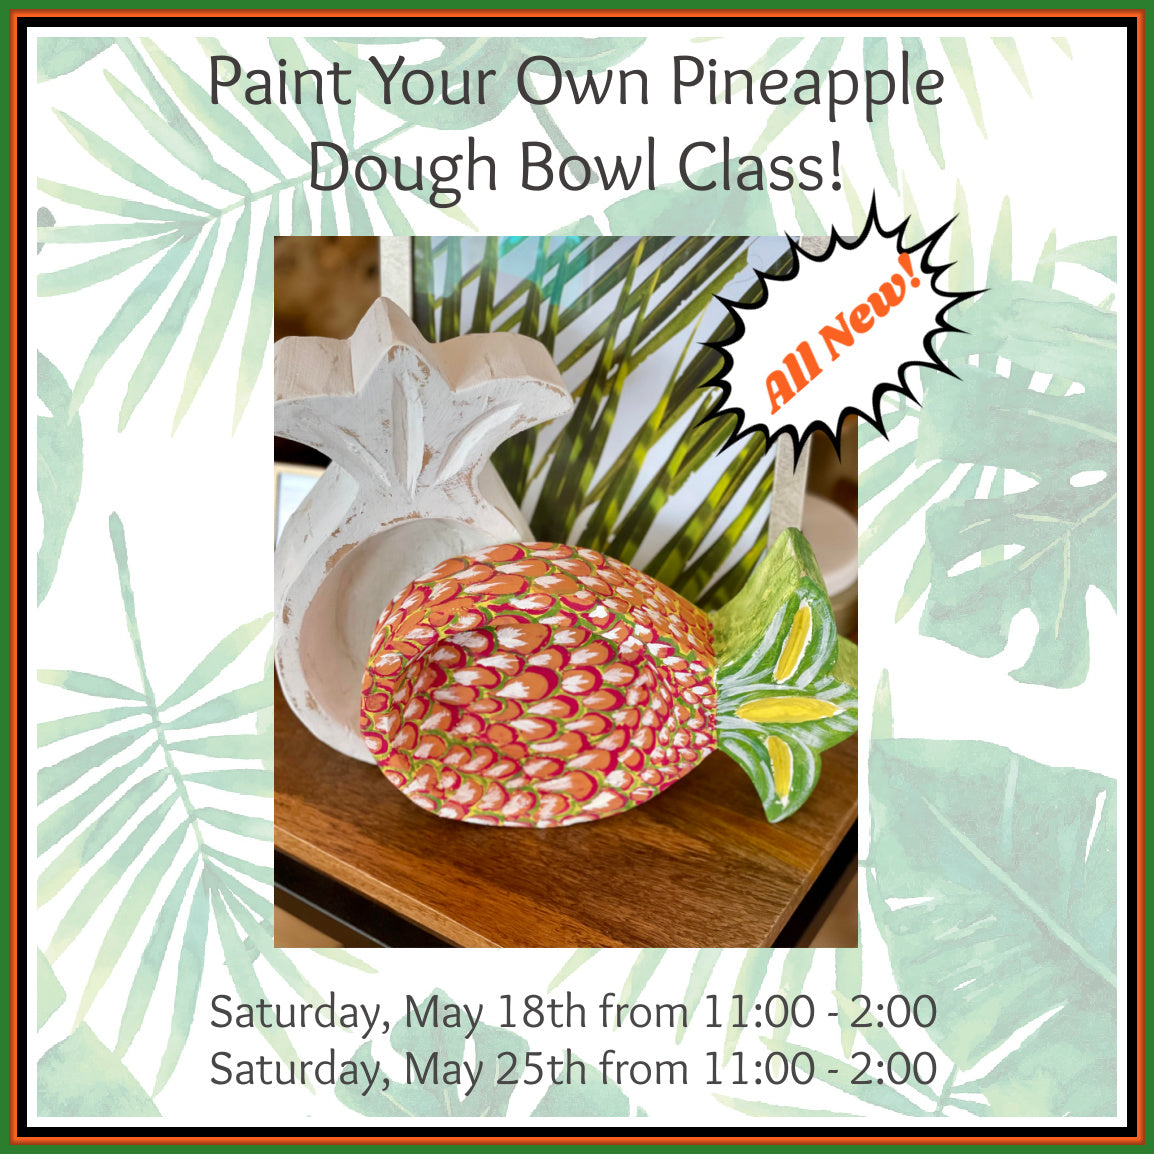 Paint Your Own Pineapple Dough Bowl Class - May 25th 11:00-2:00